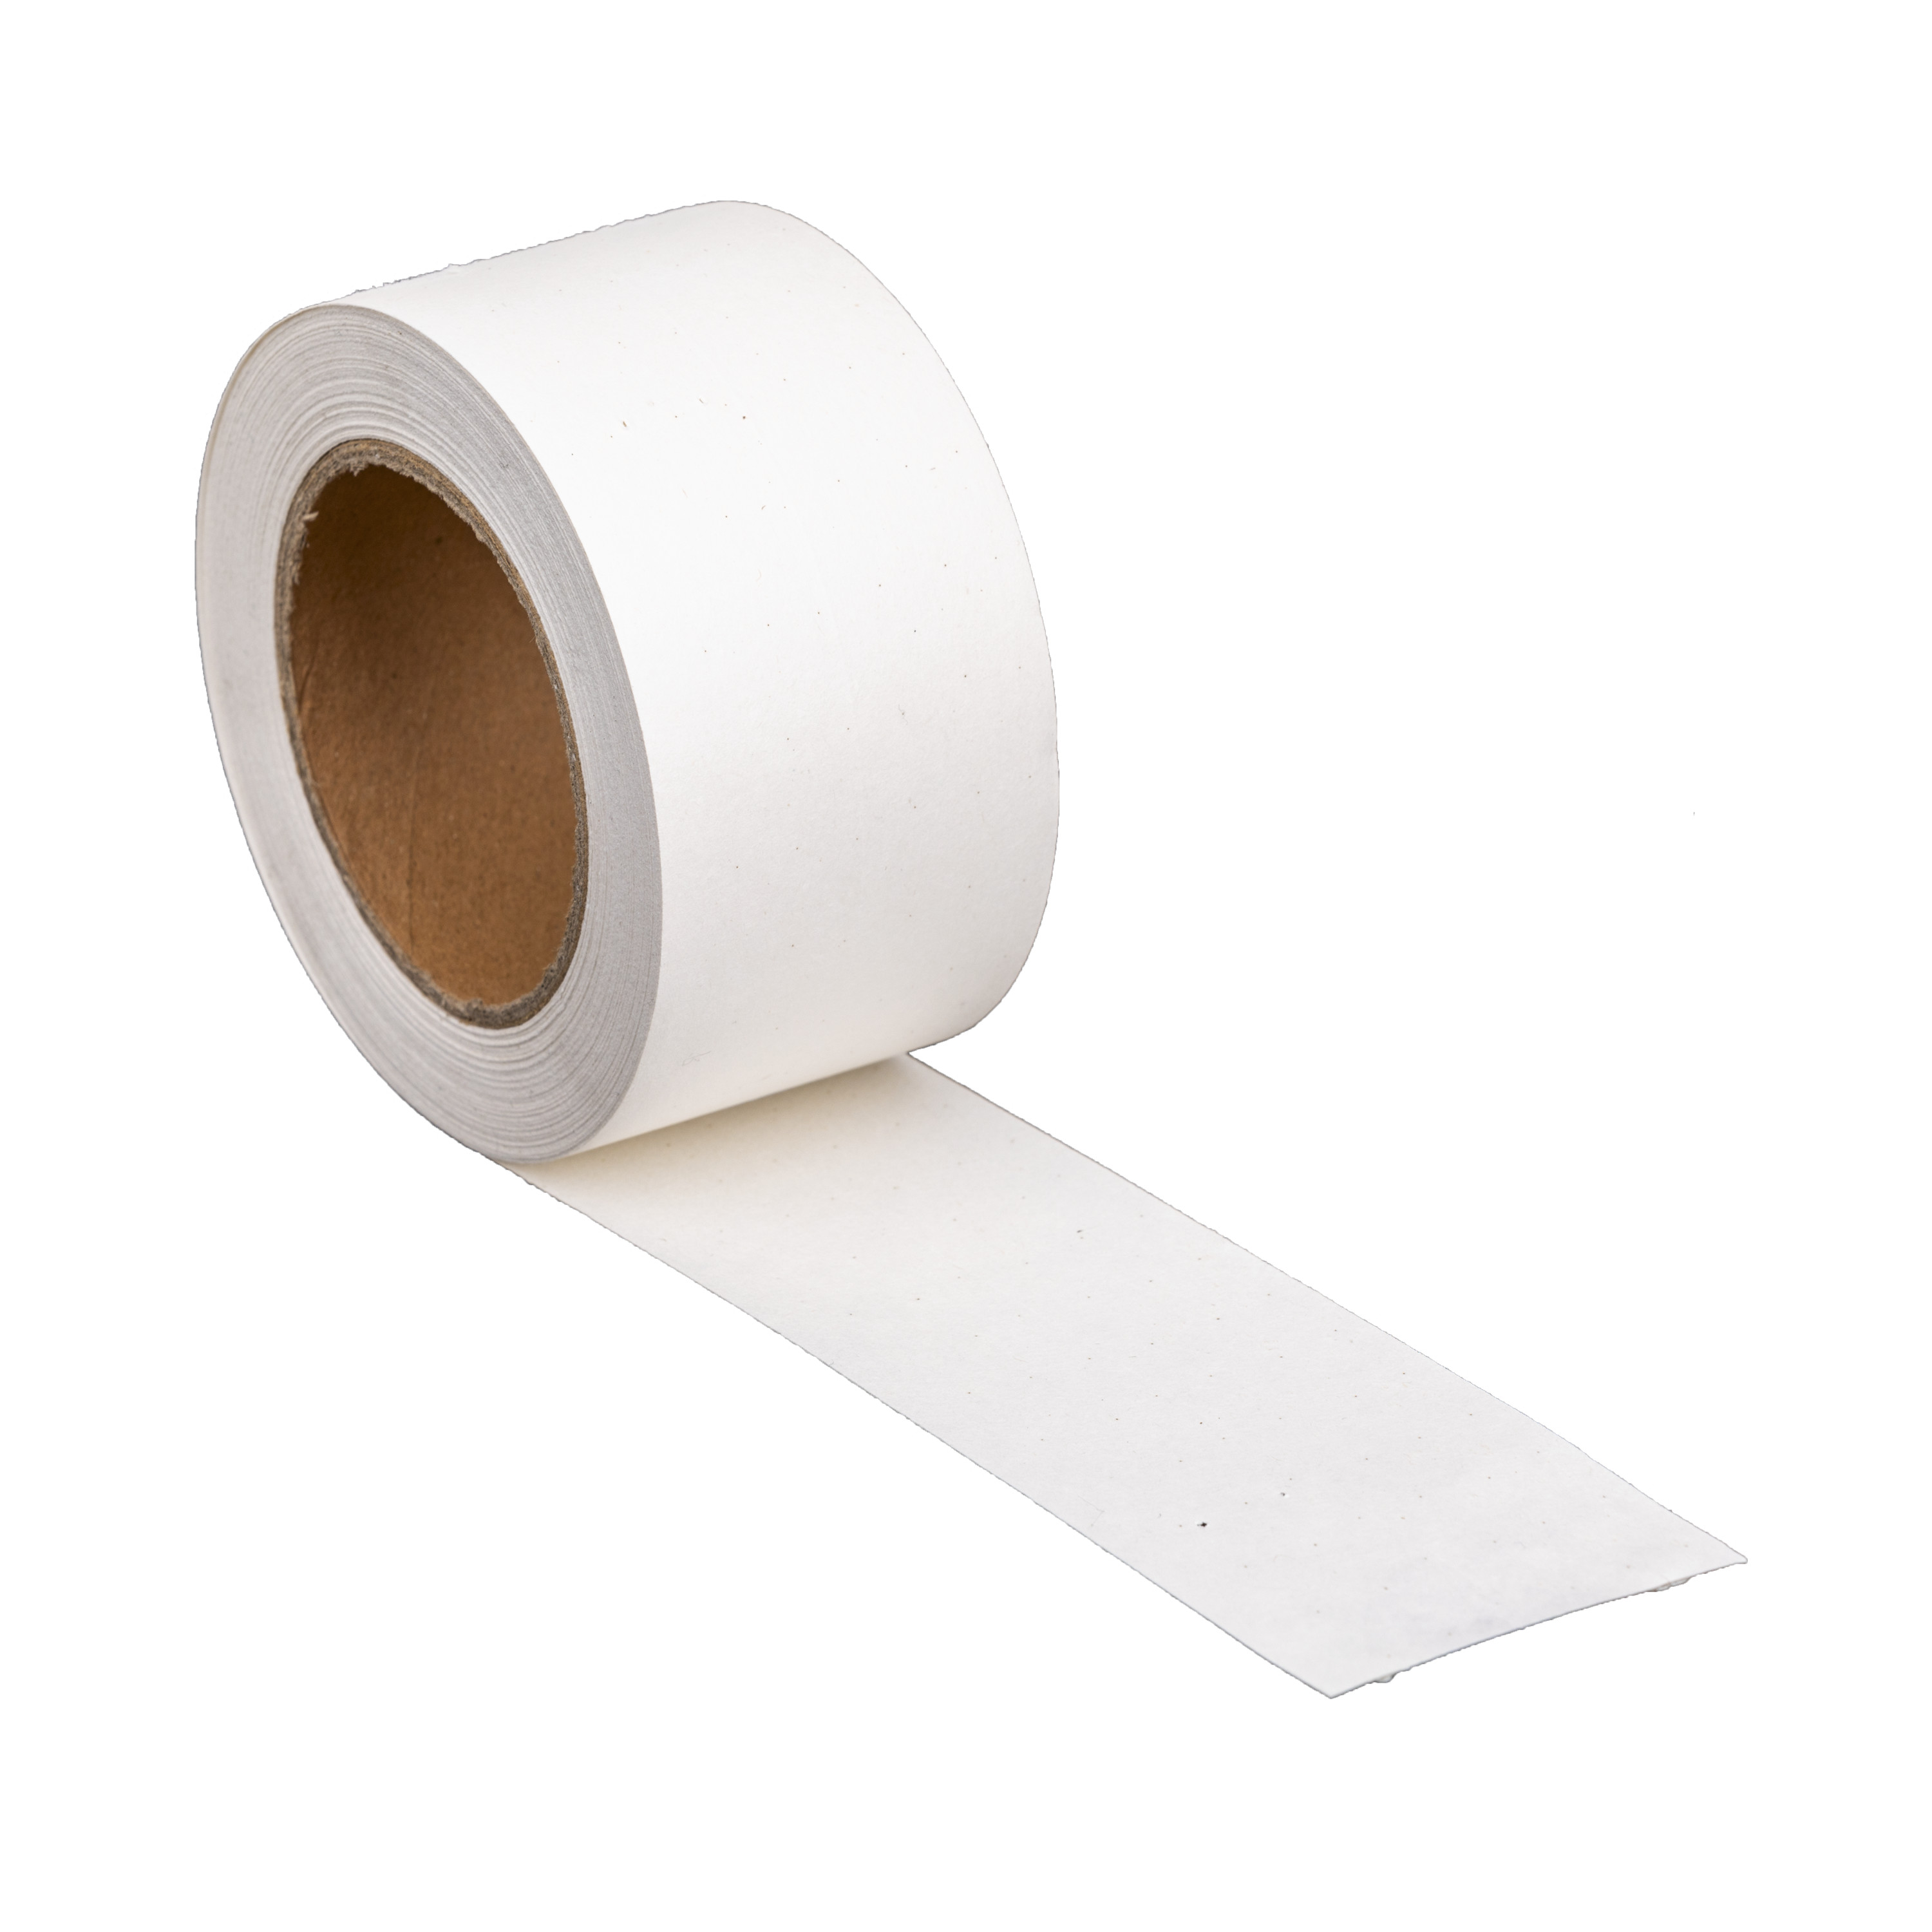 Duck Drywall All Purpose Joint Paper Tape, 2.06 in. x 75 ft., White - image 4 of 10